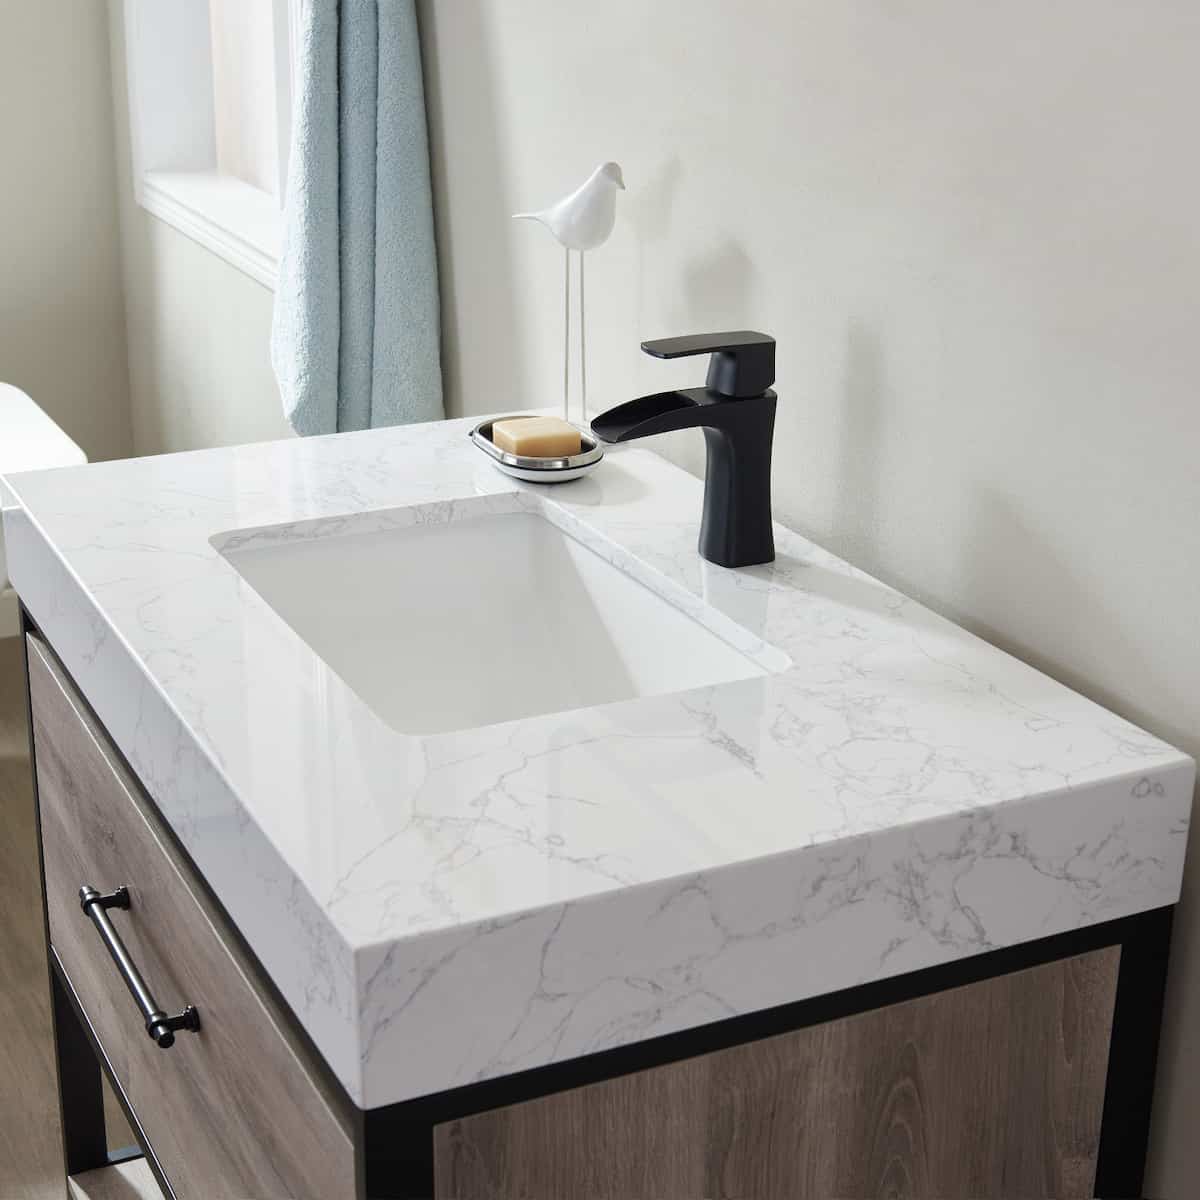 Vinnova Palma 36 Inch Freestanding Single Vanity In Mexican Oak with White Composite Grain Stone Countertop Without Mirror Counter 701236-MXO-GW-NM